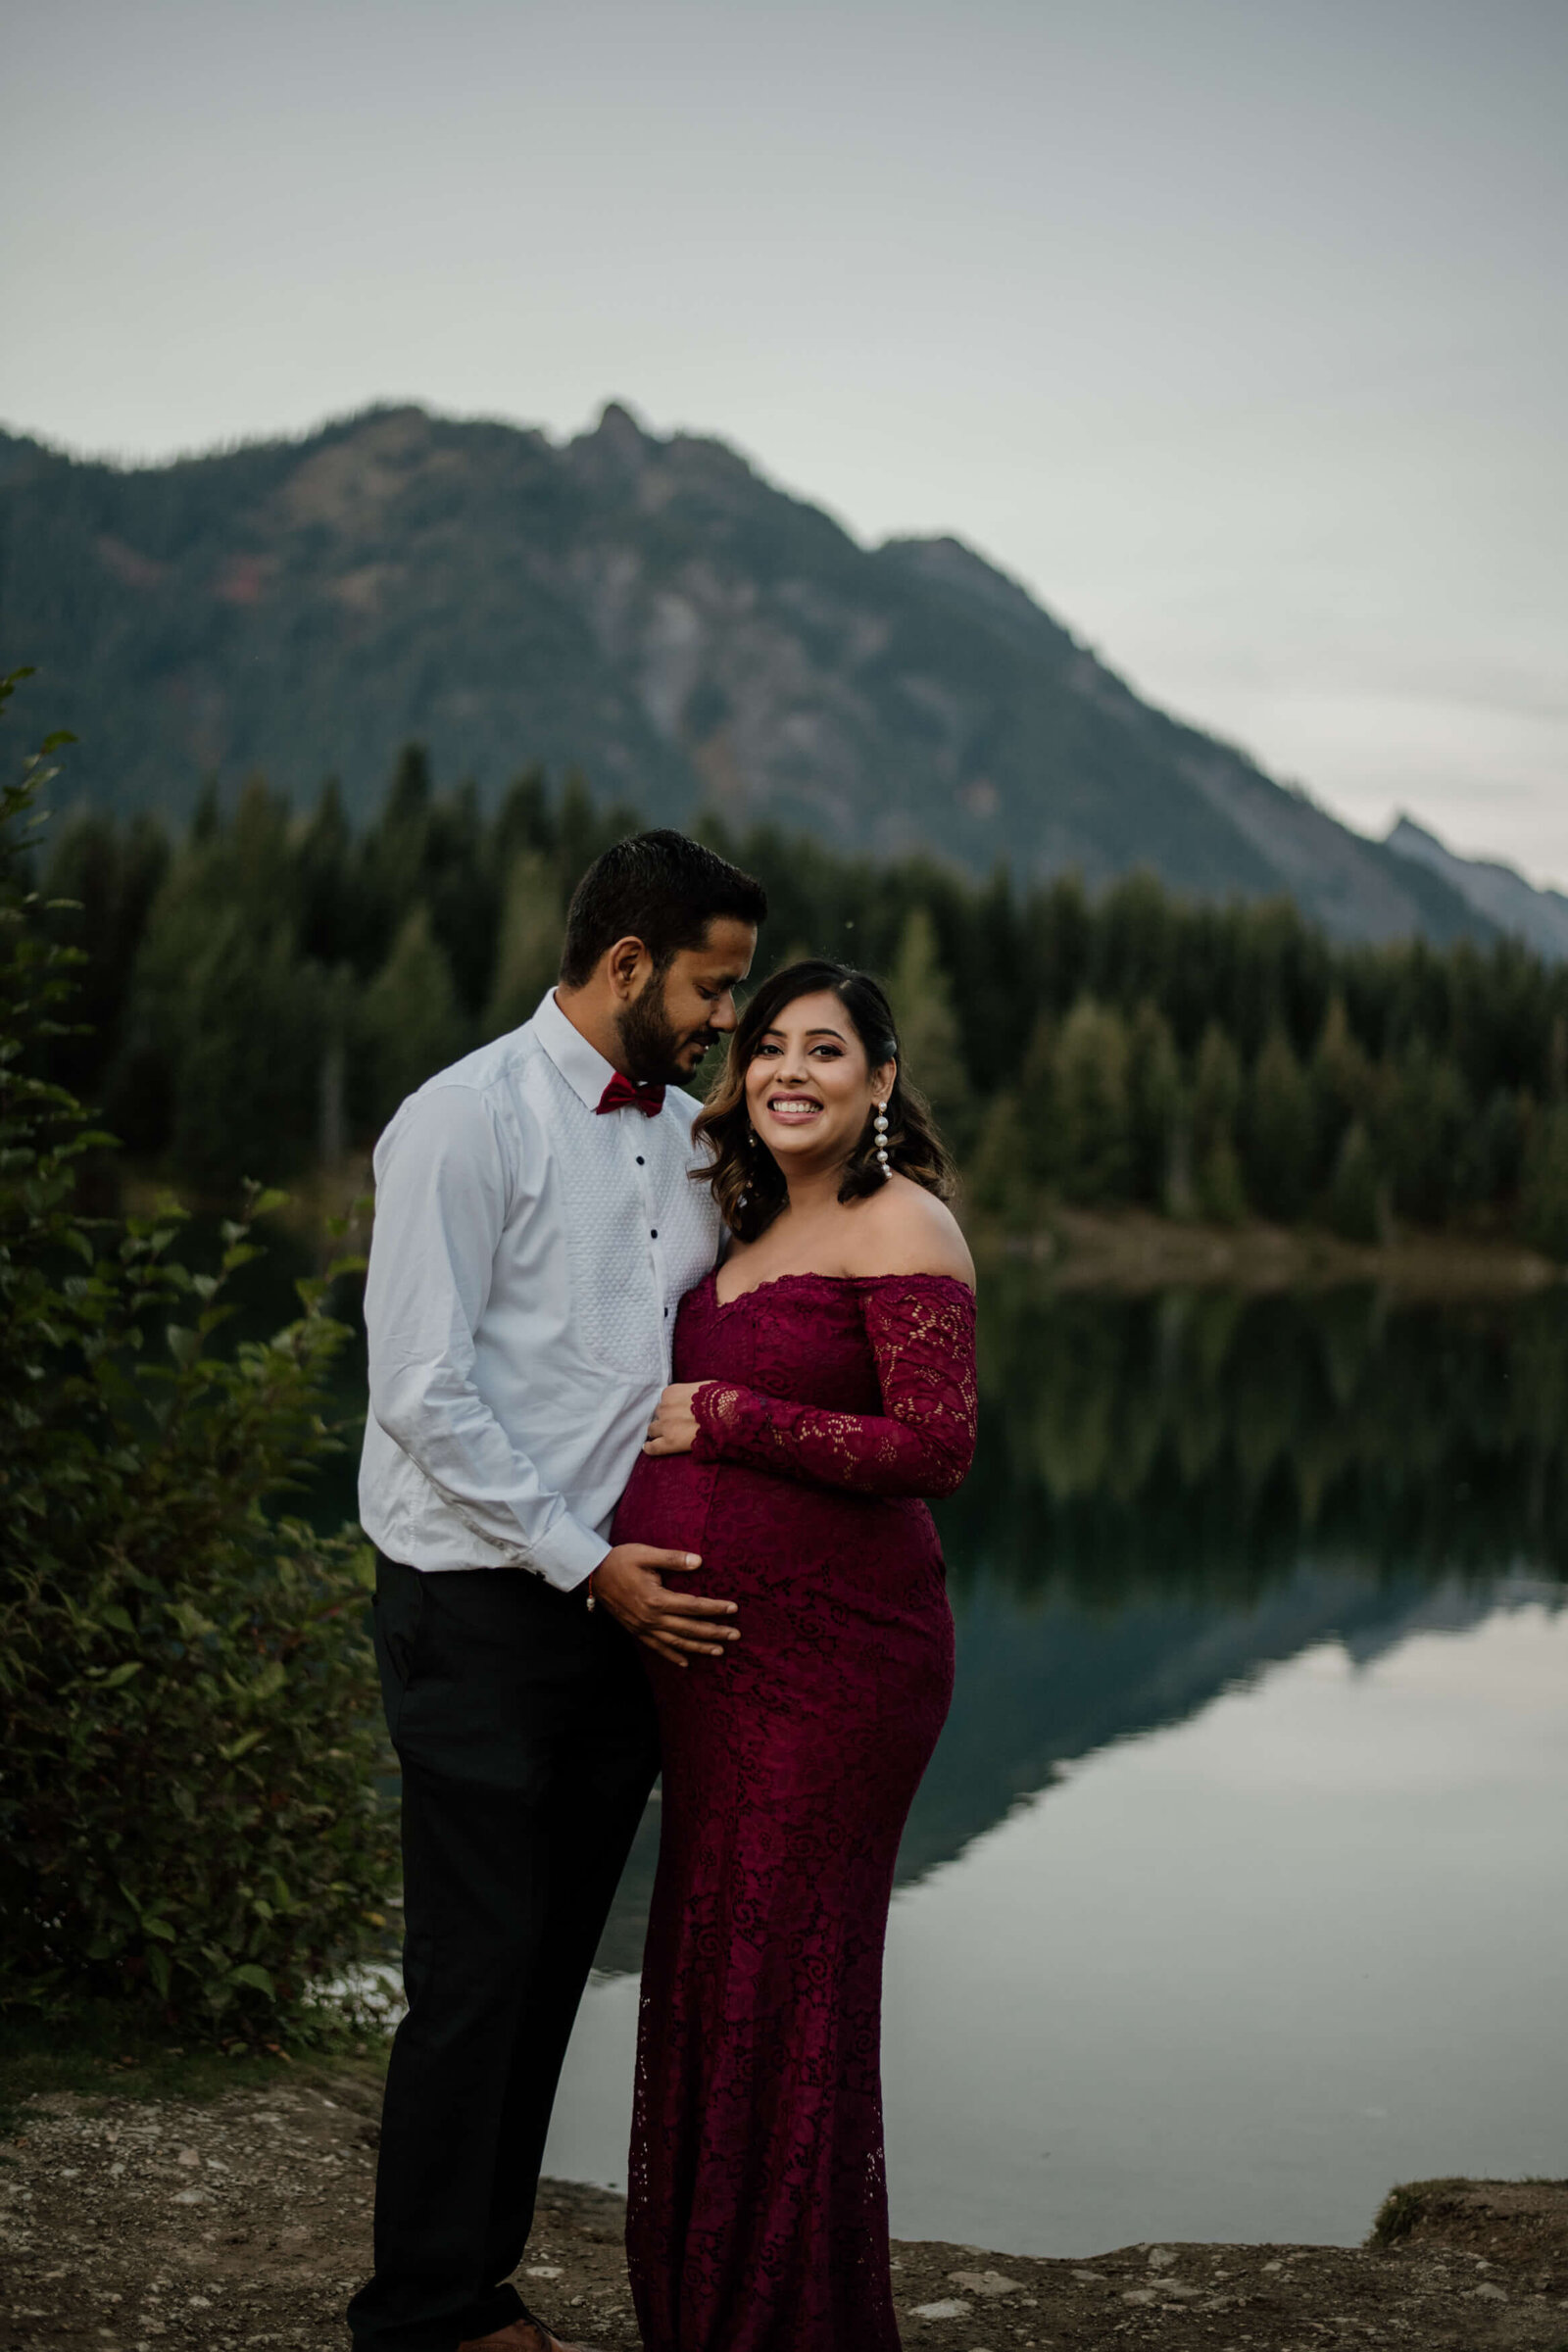 Couple standing together in front of pond and mountain.